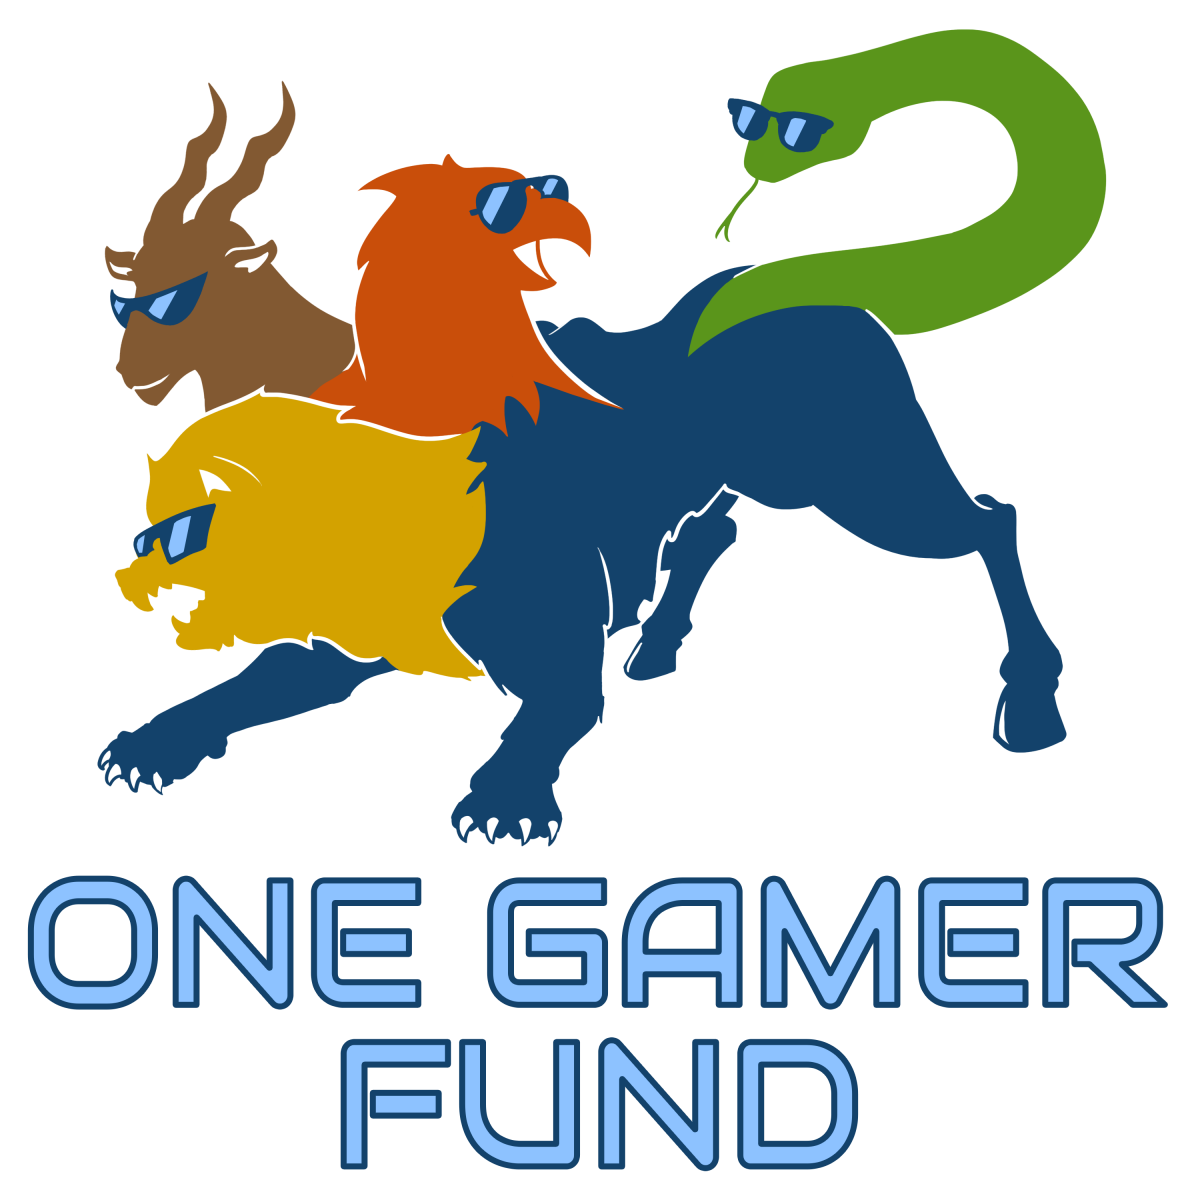 One Gamer Fund brings together seven gaming charities for special event